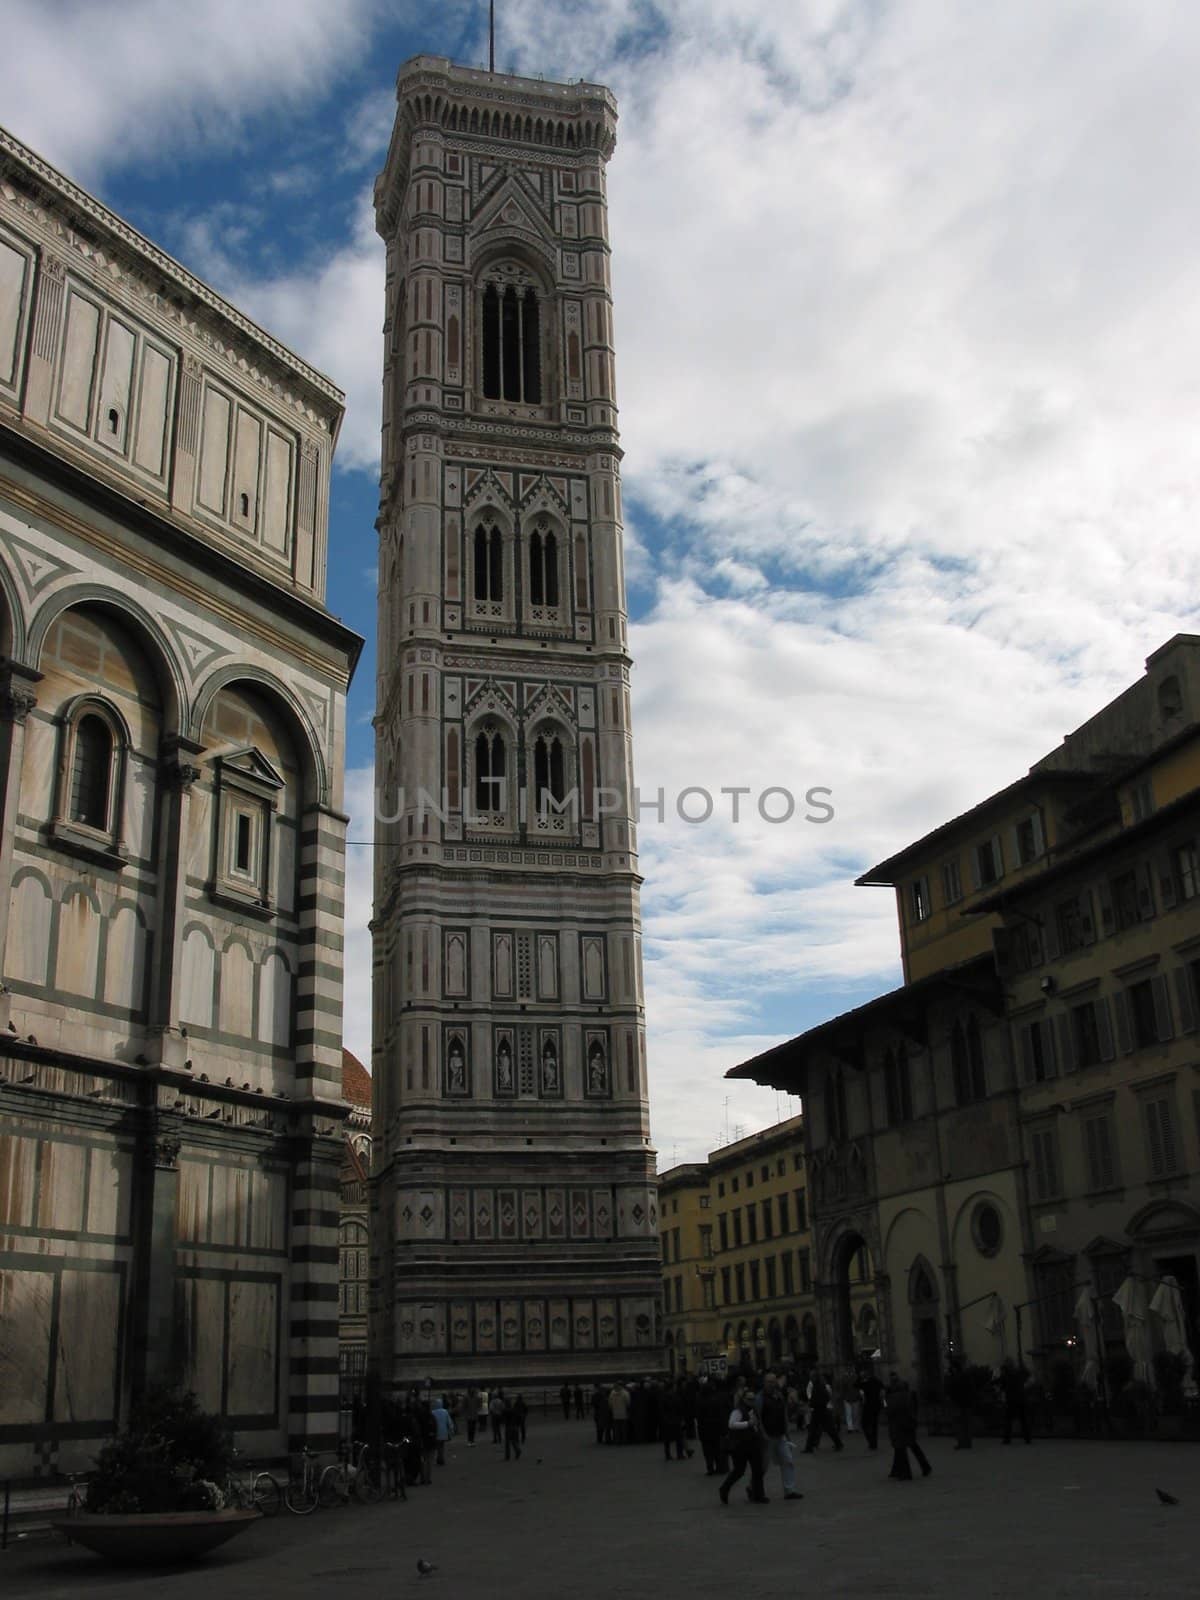 The dome of Florence is a jewel of Architecture